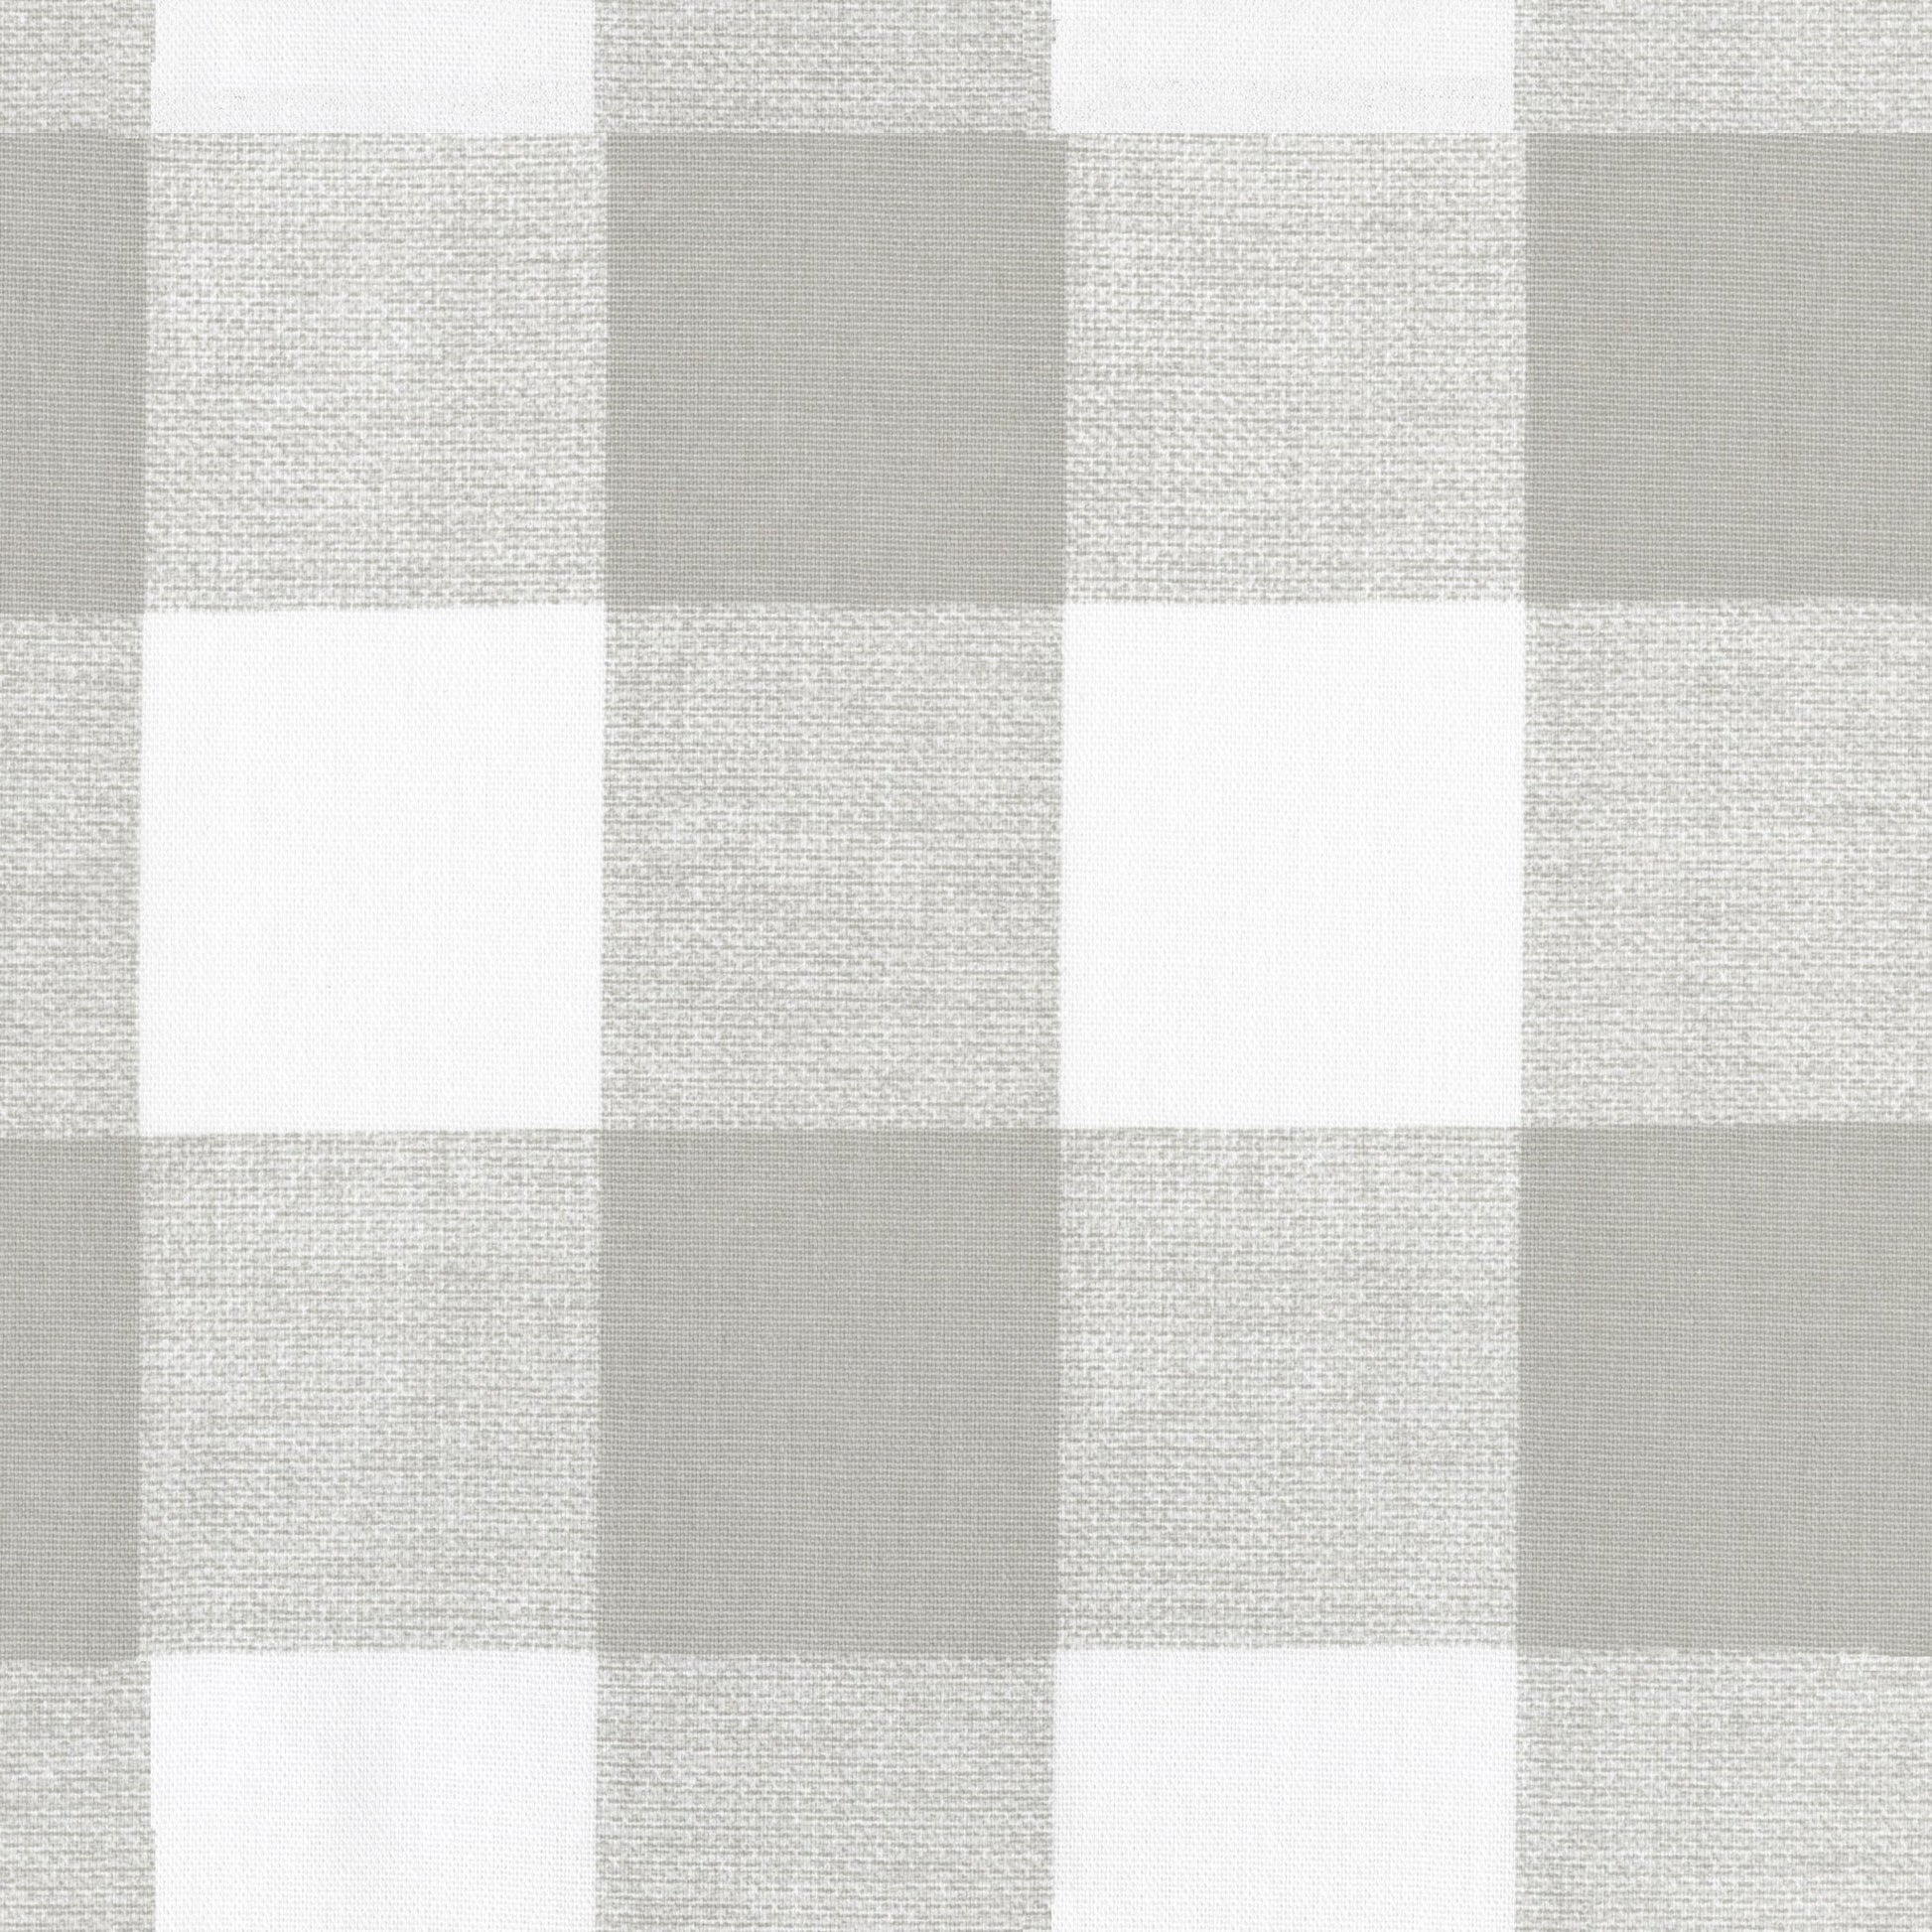 White and Gray Buffalo Plaid Crib Bedding Swatches - New Arrivals Inc